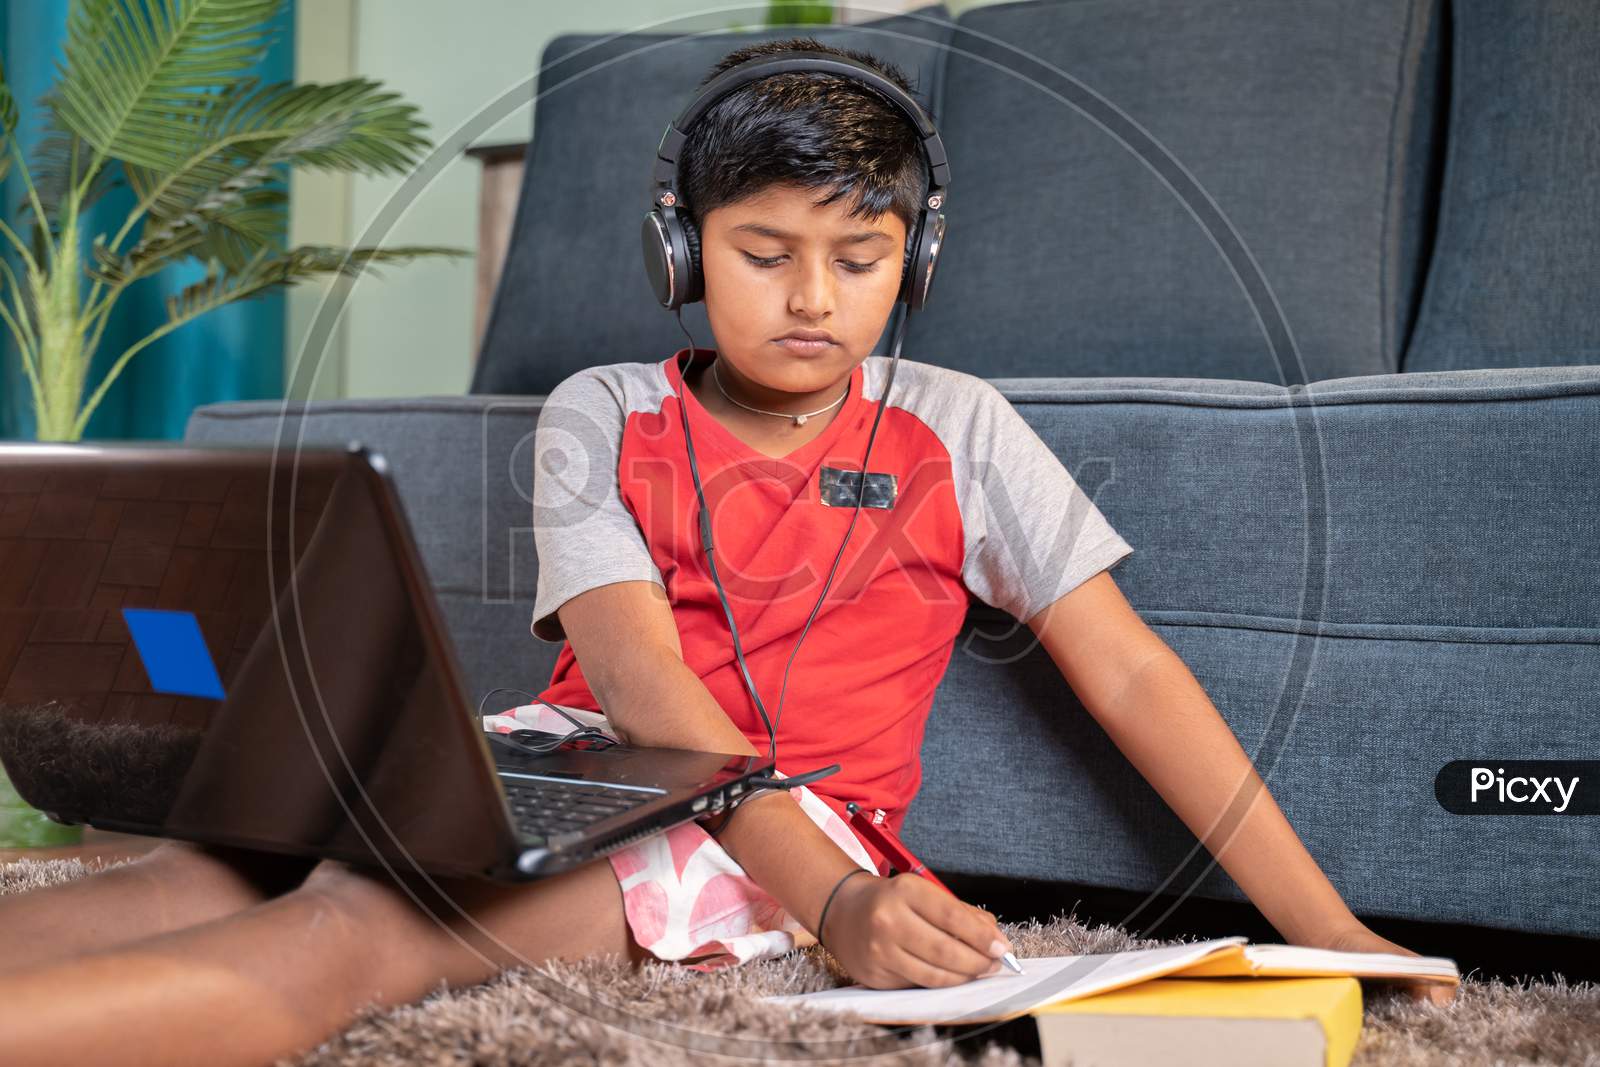 Kid With Headphone Noting Down To Book From Laptop During Virtual Class From Laptop At Home - Concept Of Online Classroom, Online Education, Technology And Lifestyle.